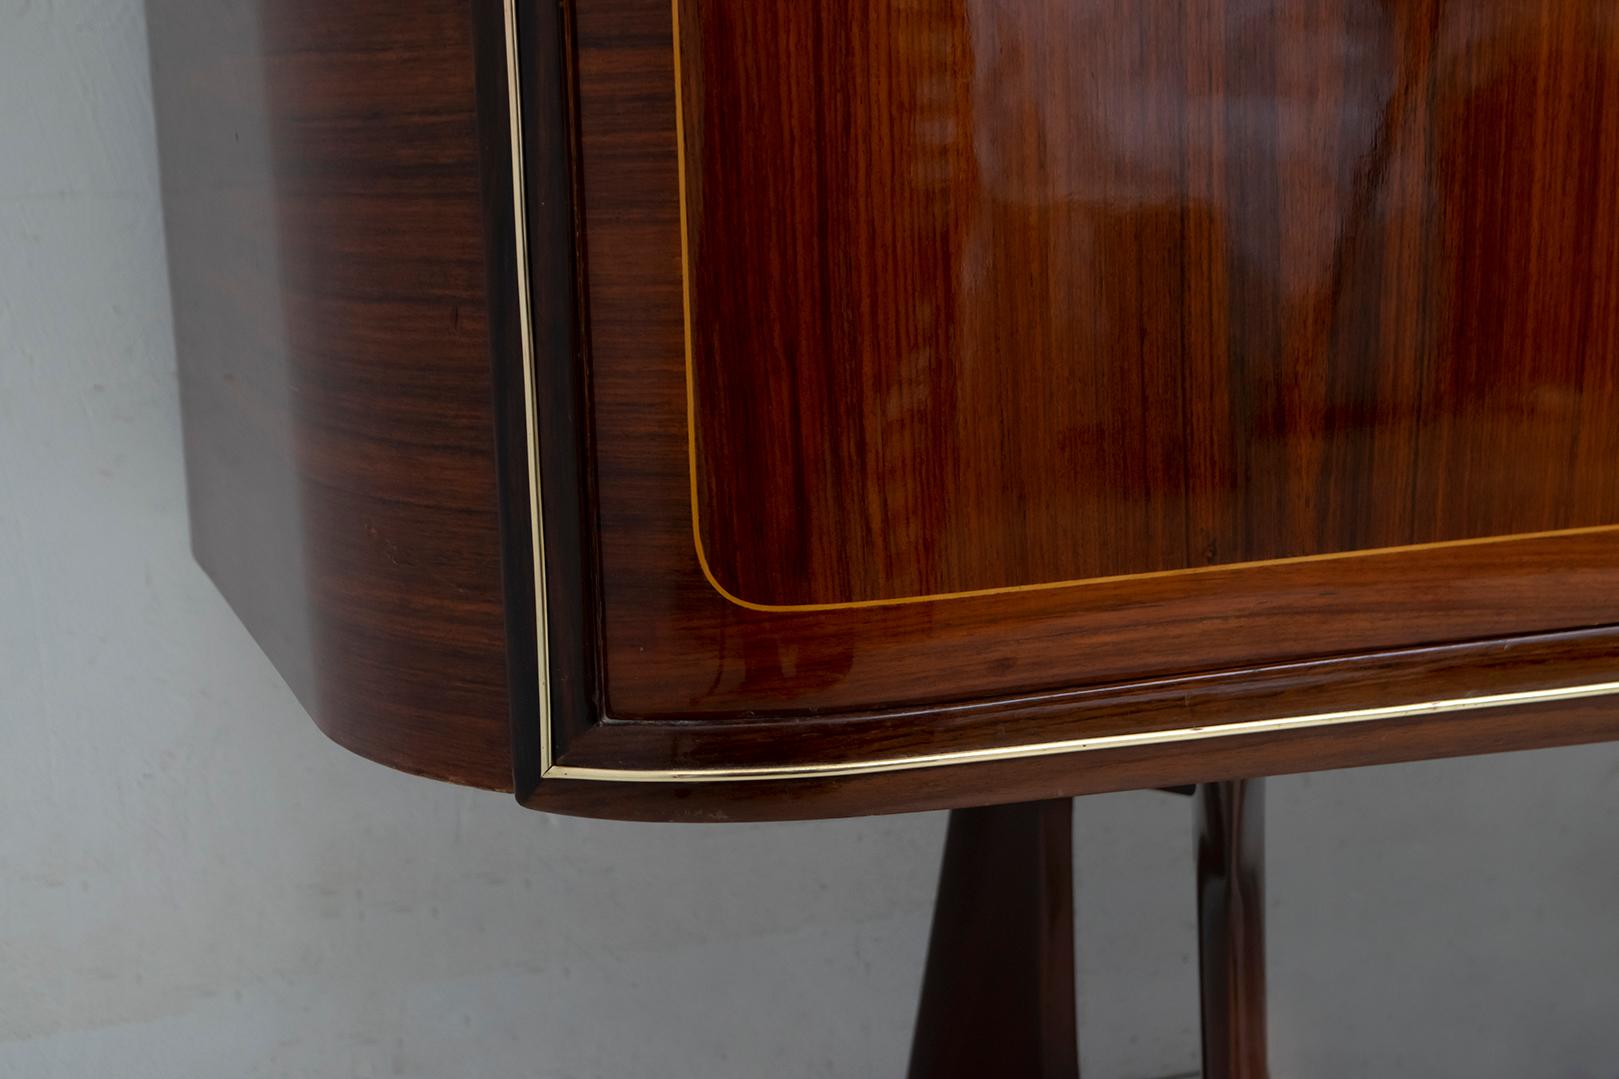 Attributed Gio Ponti Mid-Century Italian Mahogany and Brass Bar Cabinet, 1950s For Sale 6